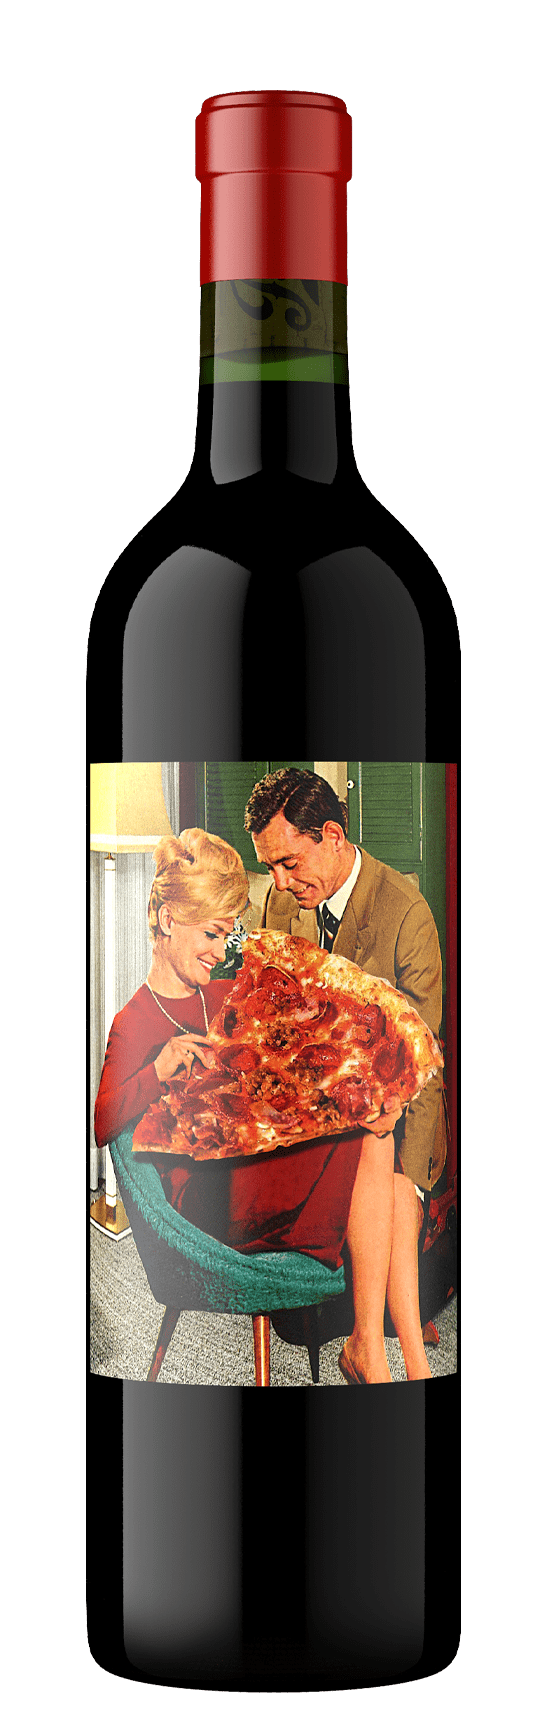 Pizzaboy, Red Wine, California